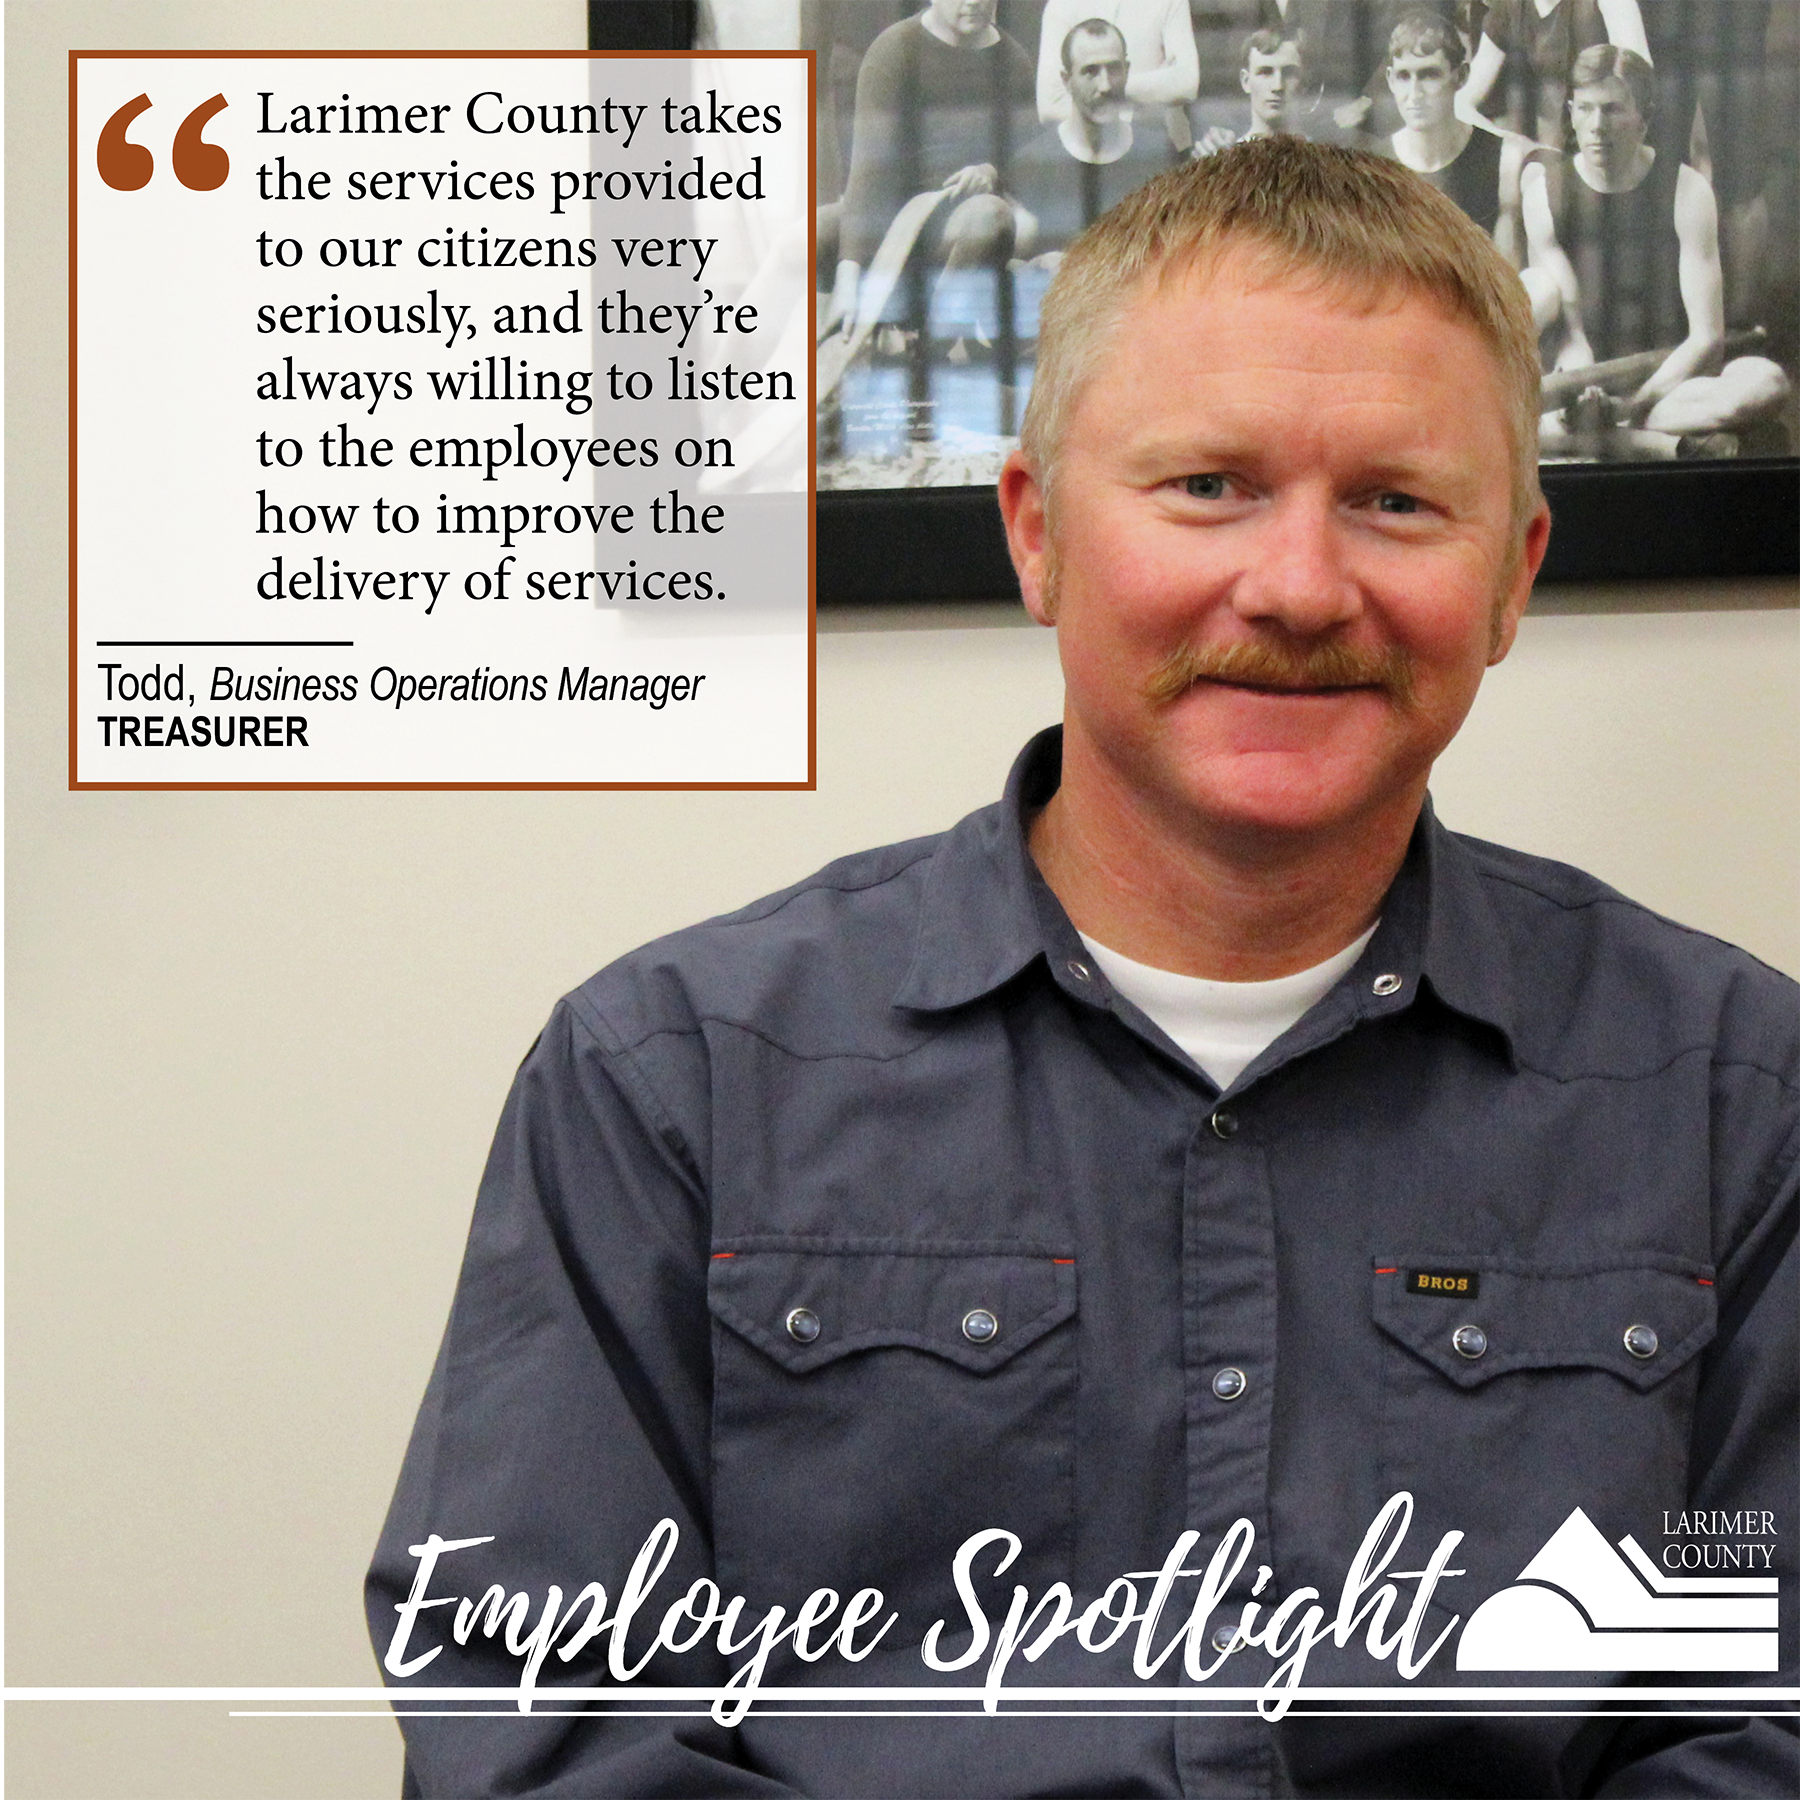 Image 12: "Larimer County takes the services provided to our citizens very seriously, and they're always willing to listen to the employees on how to improve the delivery of services."